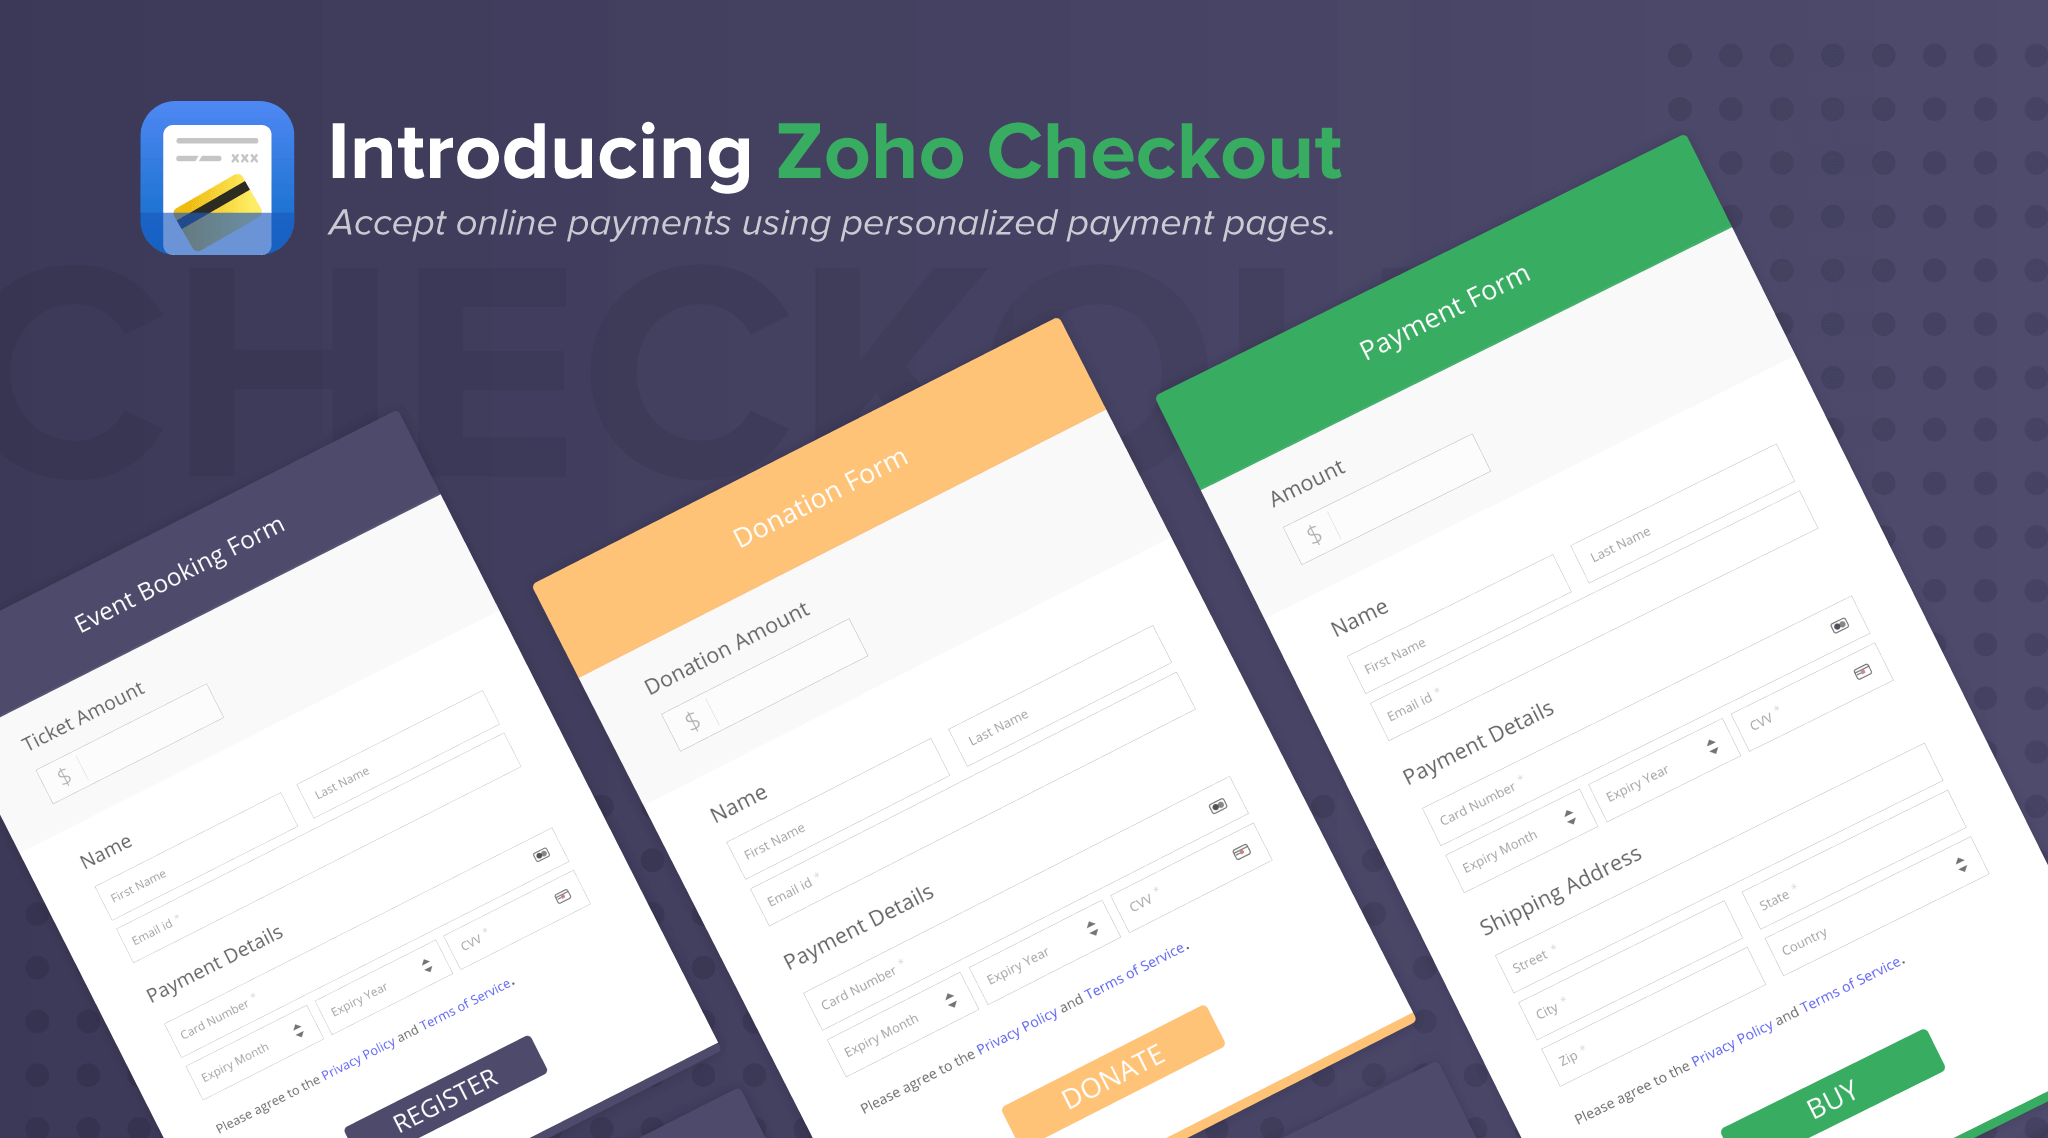 Introducing Zoho Checkout: Making online payments painless.